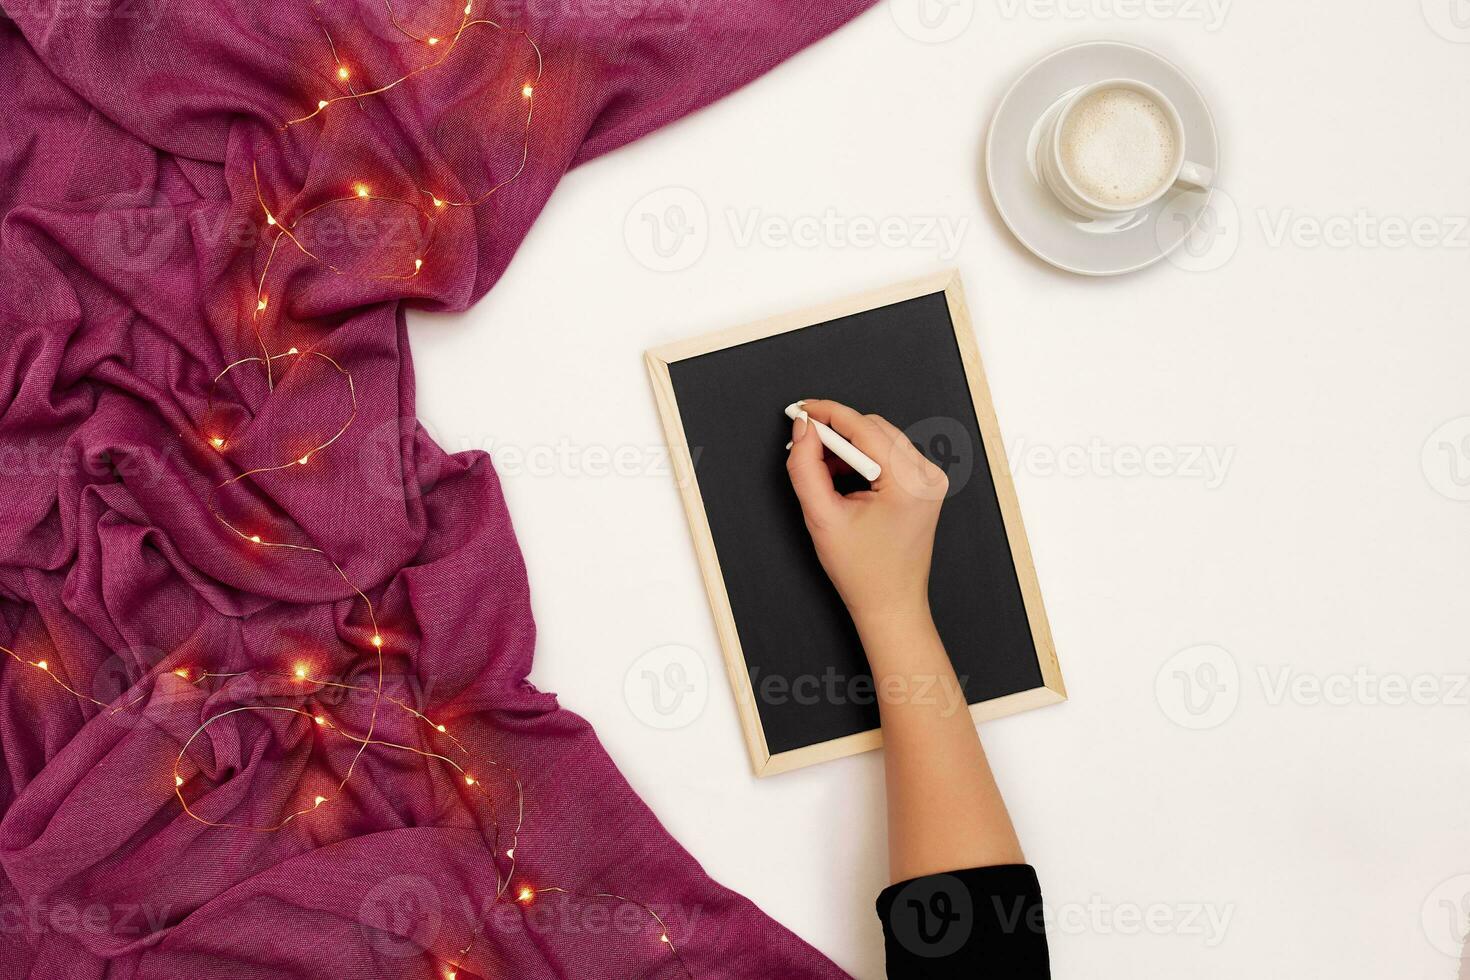 Top view of girl's hand writing on small black wooden board on white surface with coffee cup and other items. Mock up photo